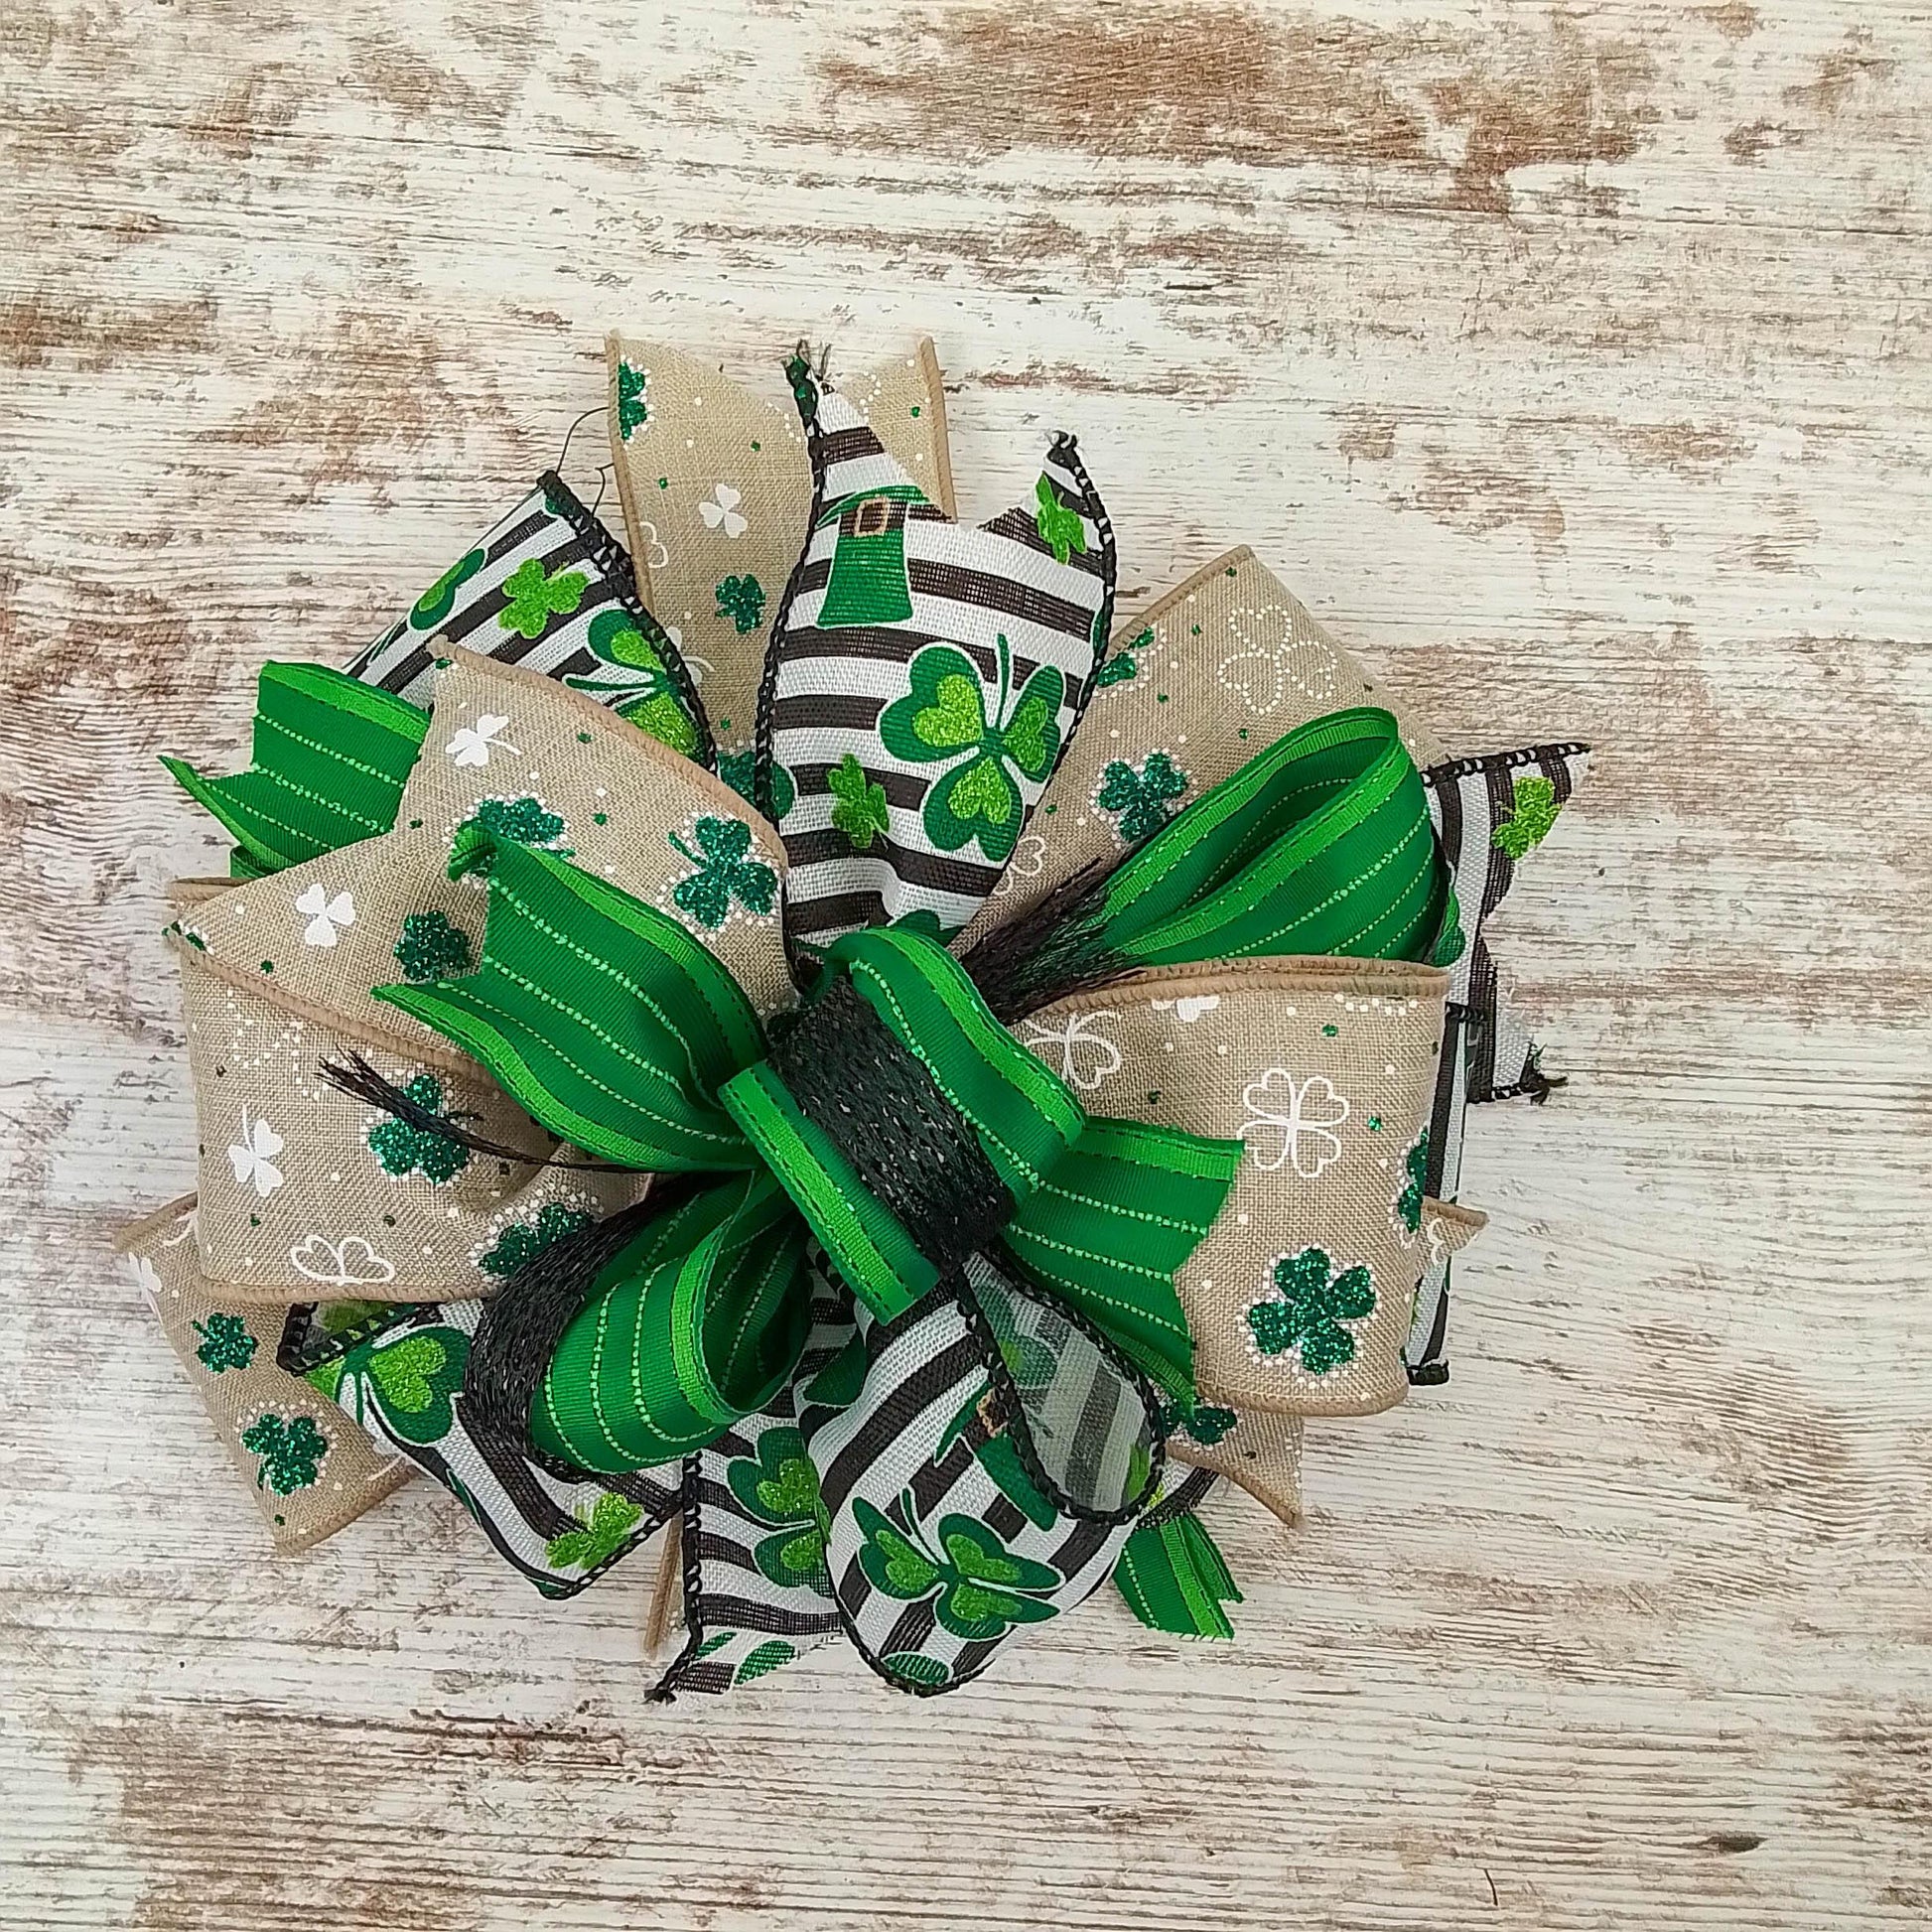 St. Patrick's Day Clover Black White Green Lantern Wreath Bow - Burlap Wreath Embellishment for Making Your Own - Layered Full Handmade Farmhouse Already Made - Pink Door Wreaths